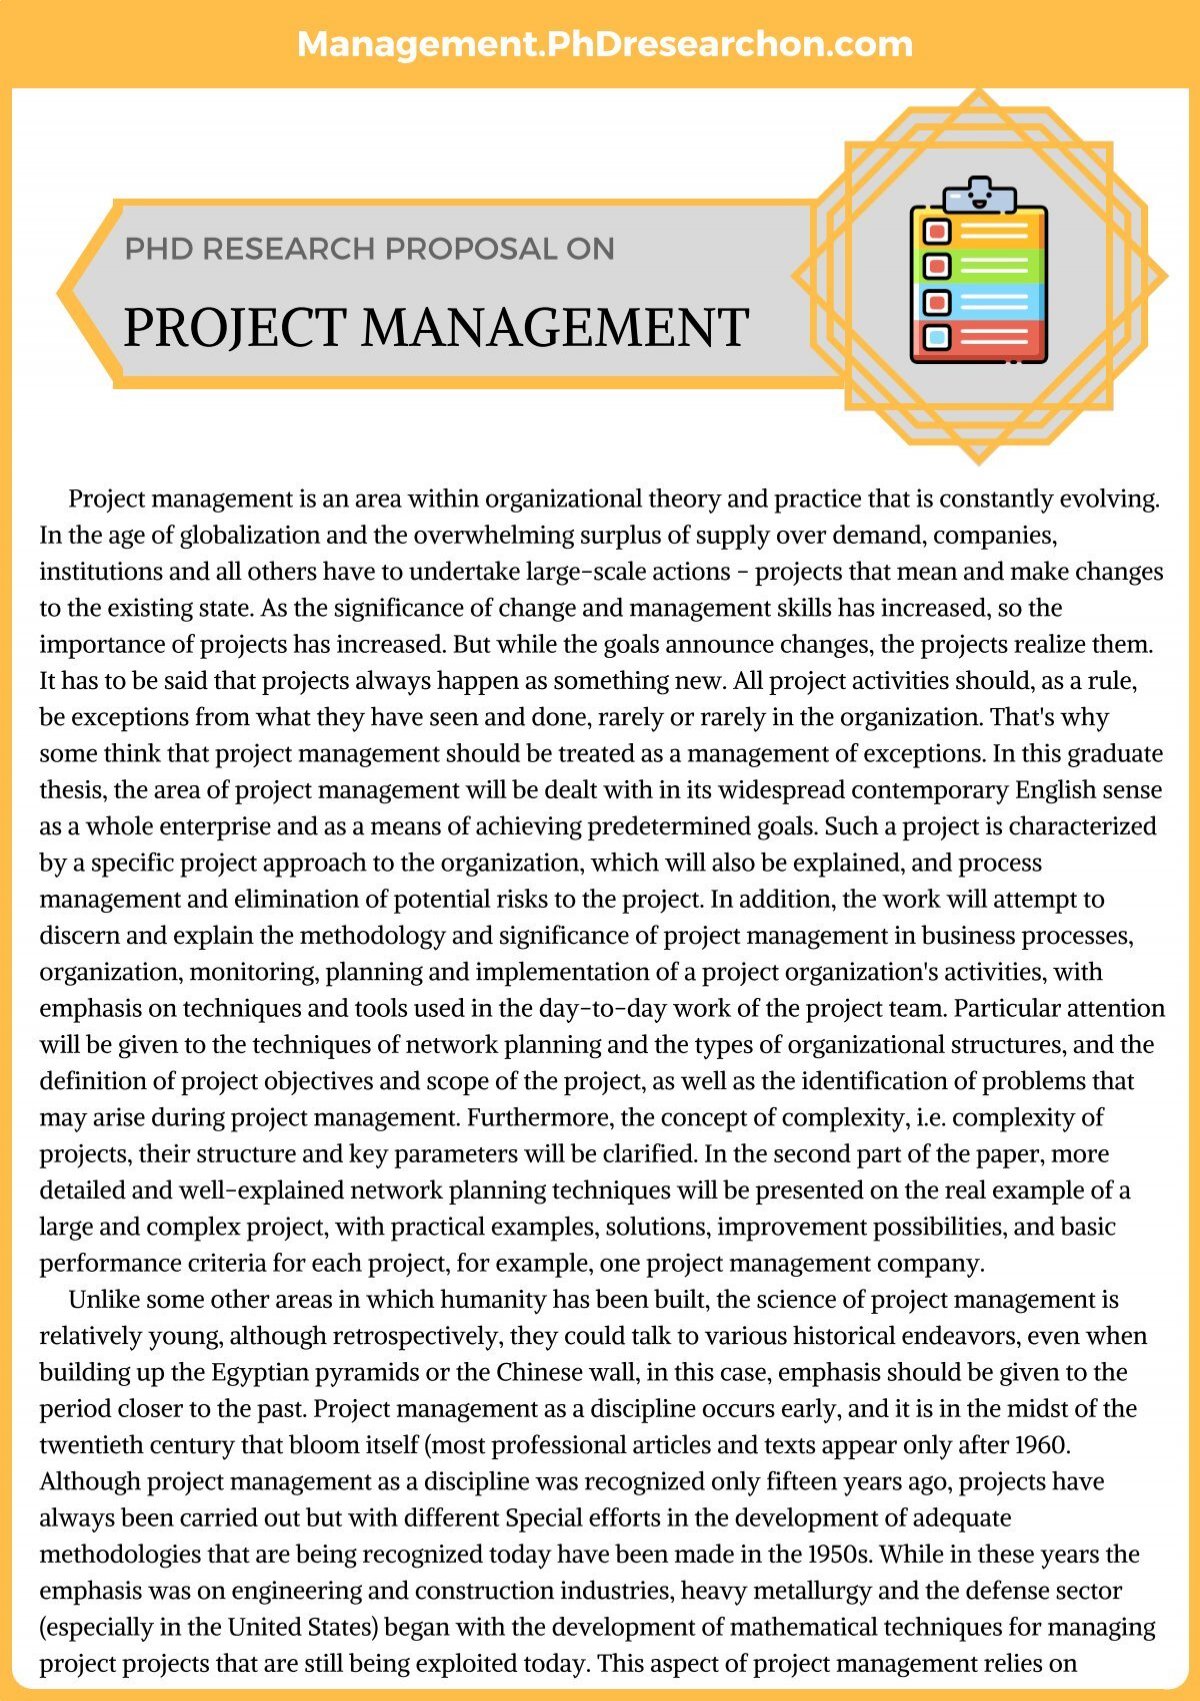 phd to project management